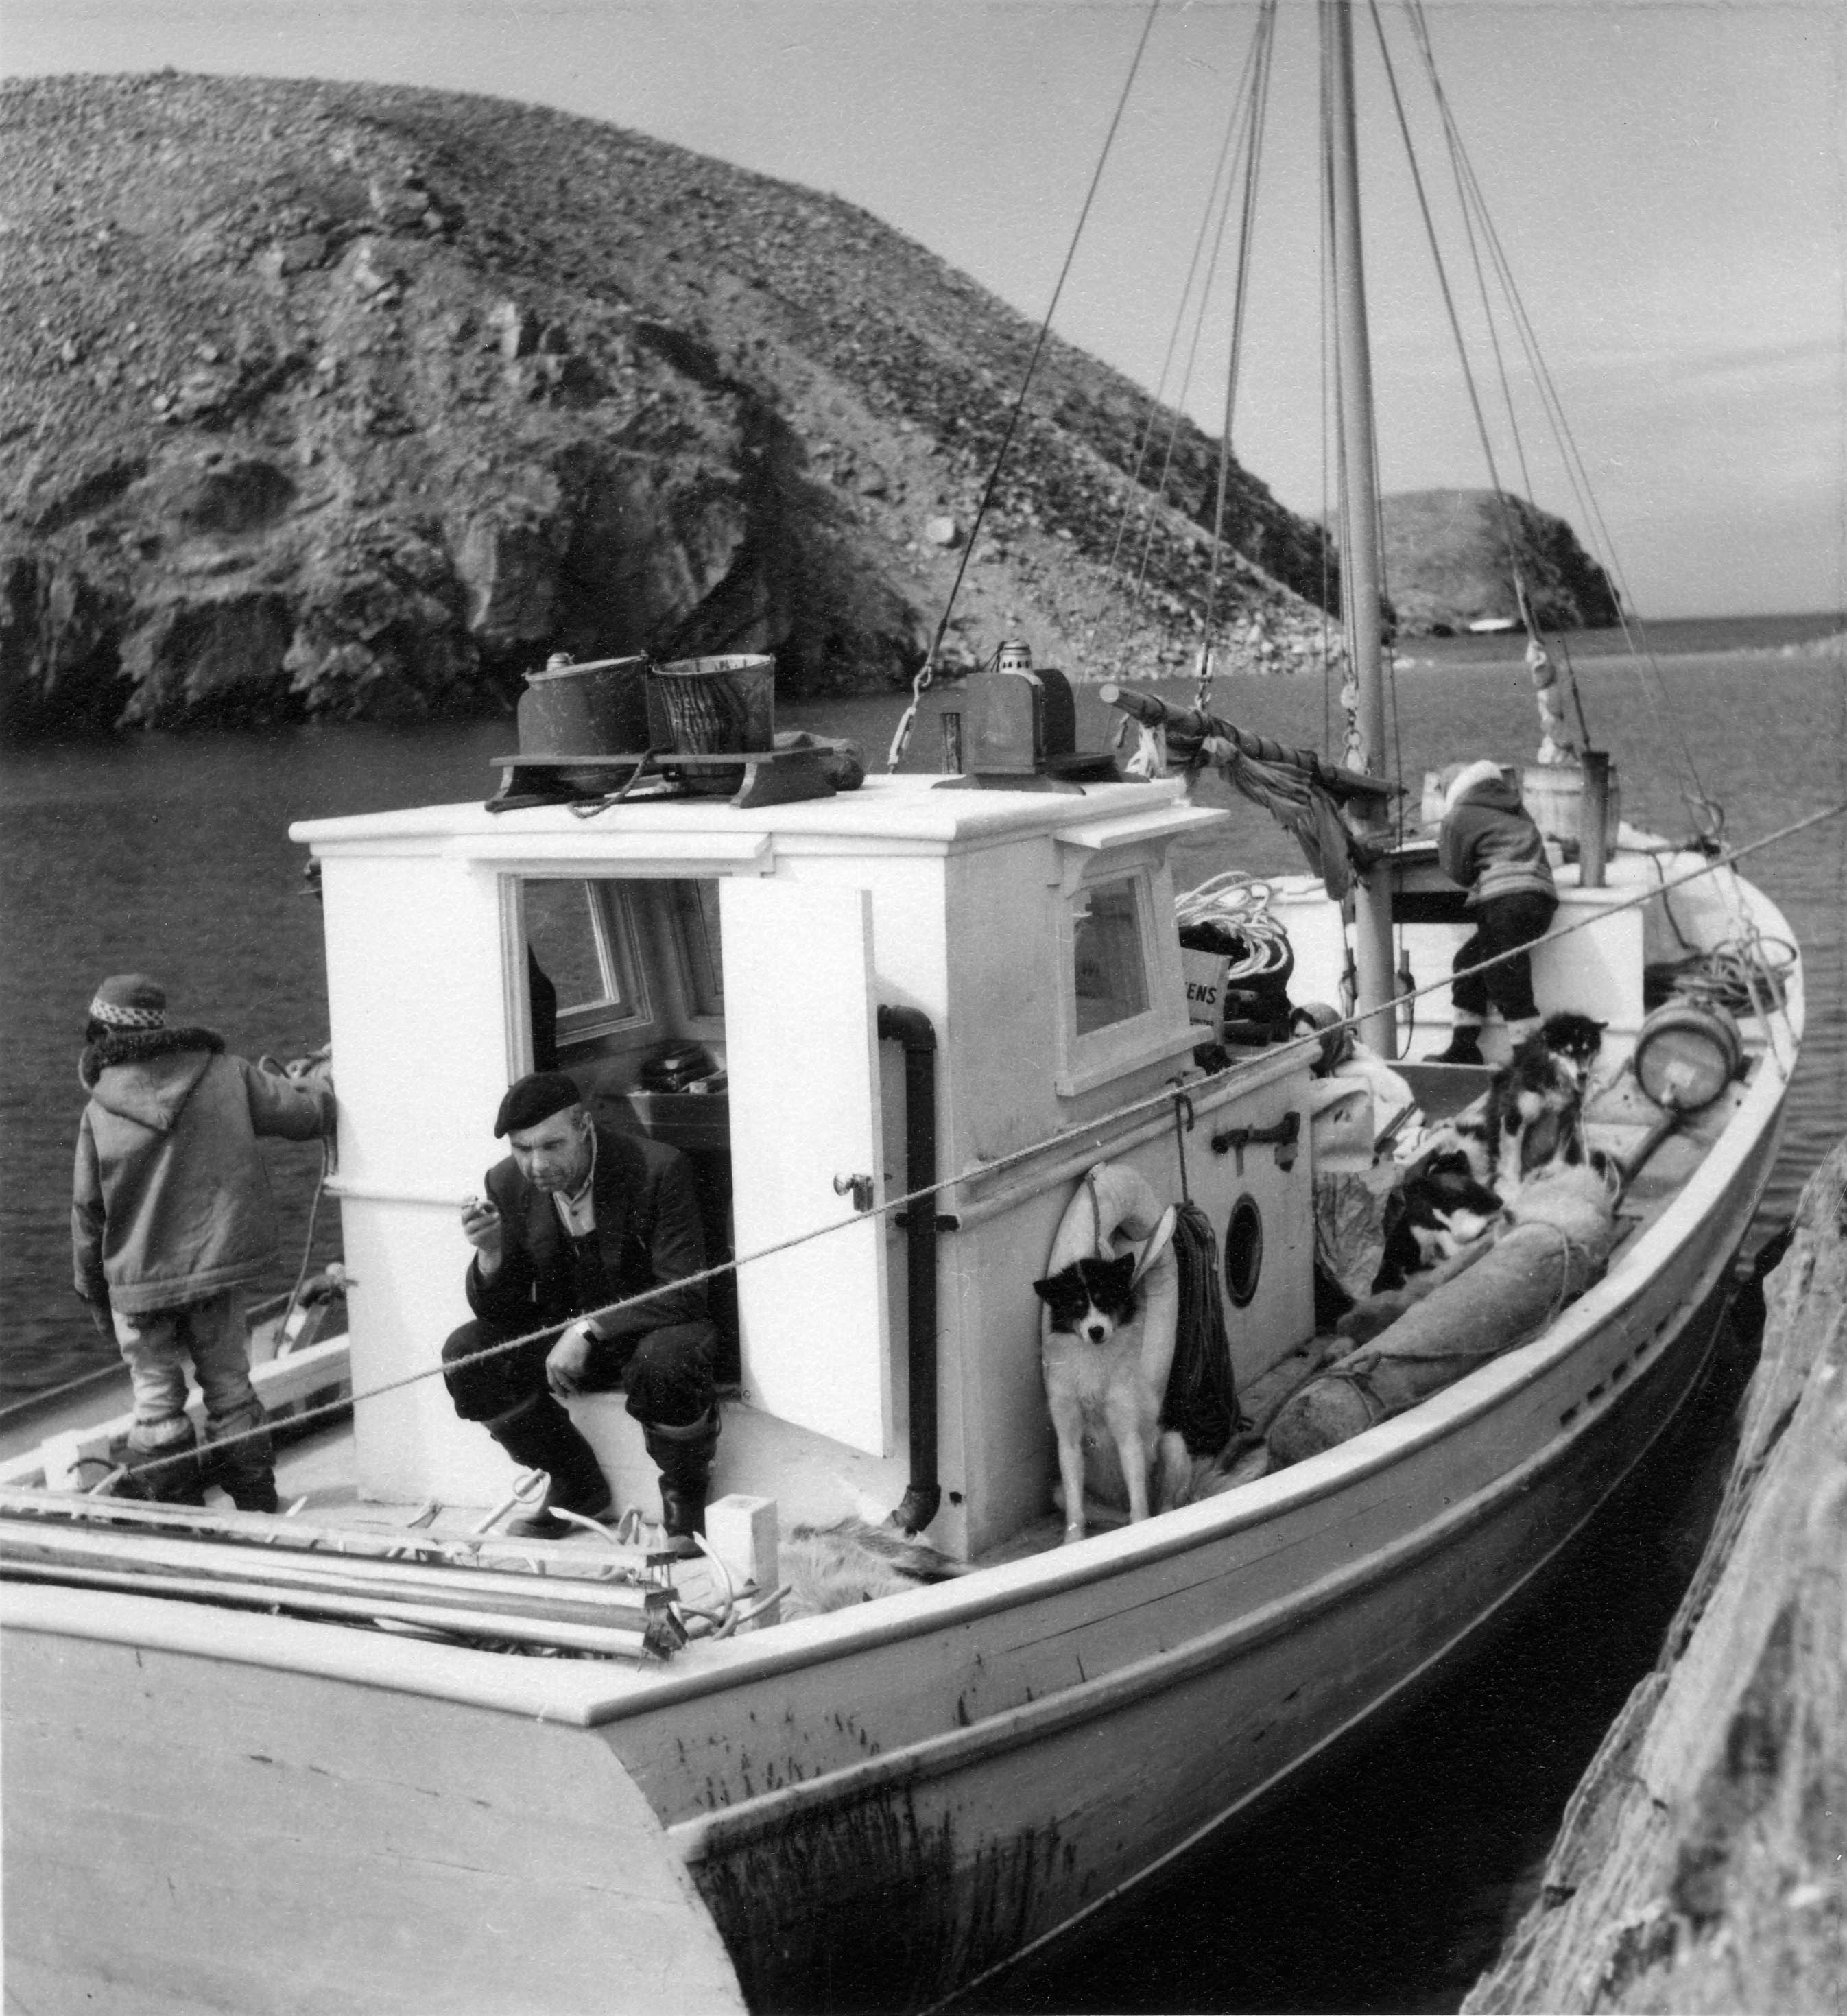 Max Budgell on his boat in Port Burwell, 1960